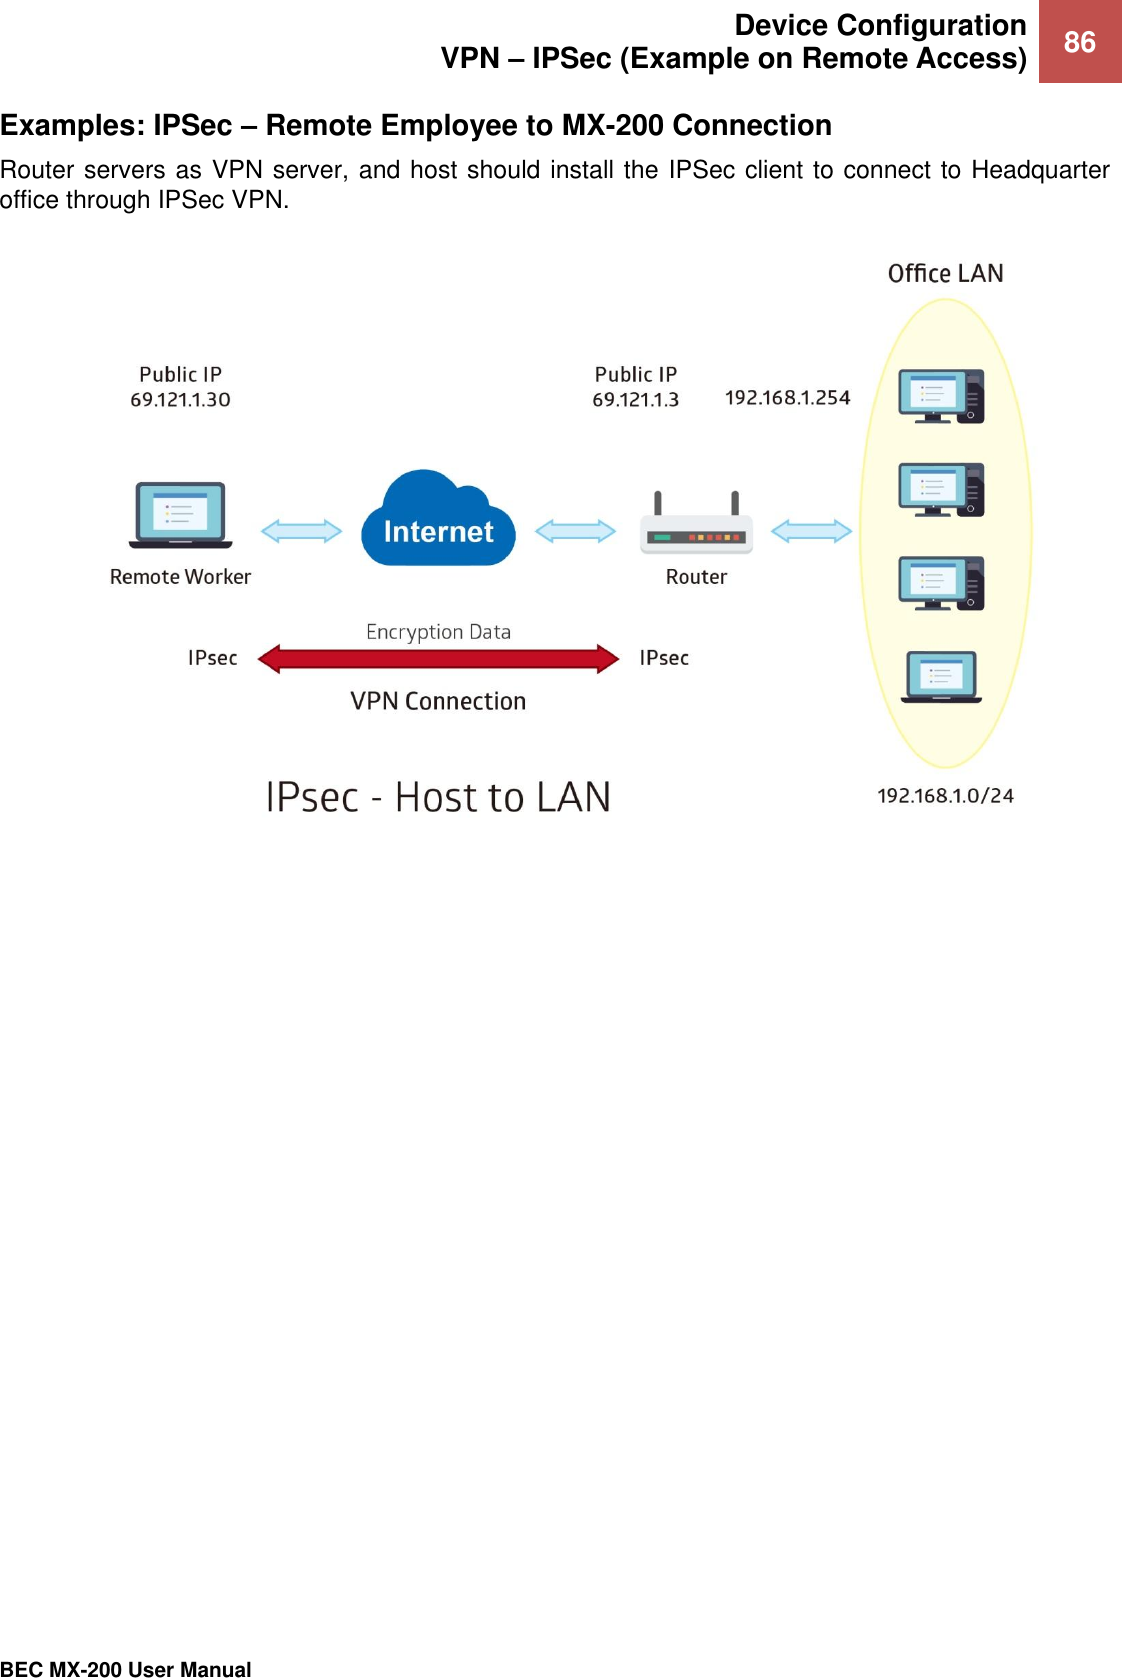  Device Configuration VPN – IPSec (Example on Remote Access) 86   BEC MX-200 User Manual  Examples: IPSec – Remote Employee to MX-200 Connection Router servers as VPN server, and host should install the IPSec client to connect to Headquarter office through IPSec VPN.       